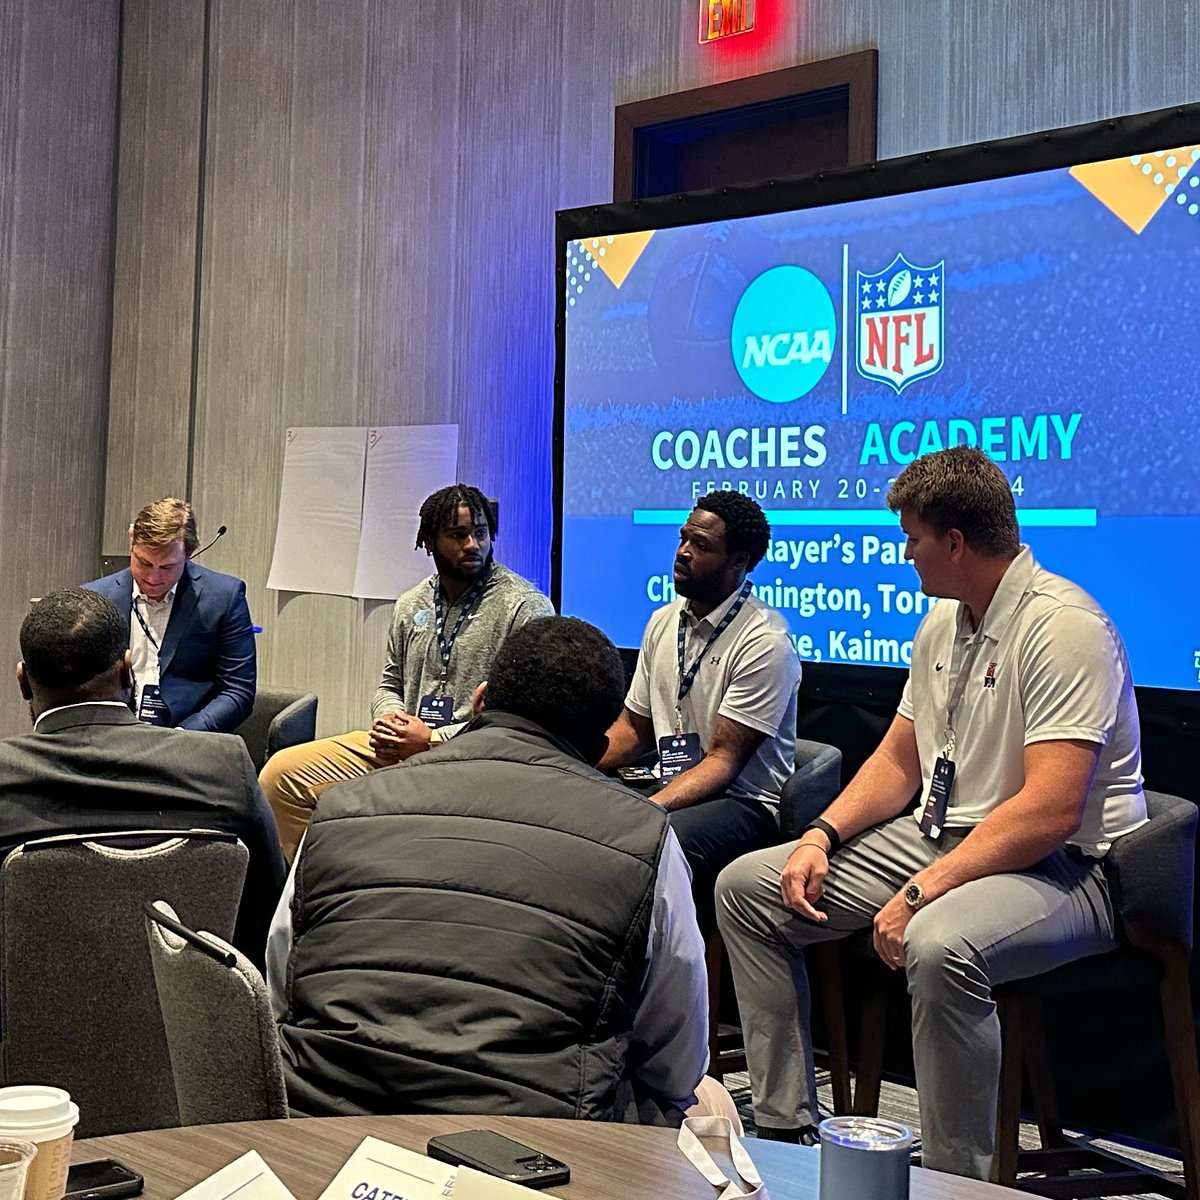 Great players panel with @ChadPennington, @_kruck75_ , @TorreySmithWR , & @theJohnLeglue about helping student athletes deal with the pressures of Social Media at the NCAA and NFL Coaching Academy @ChrisBober @cpfootball